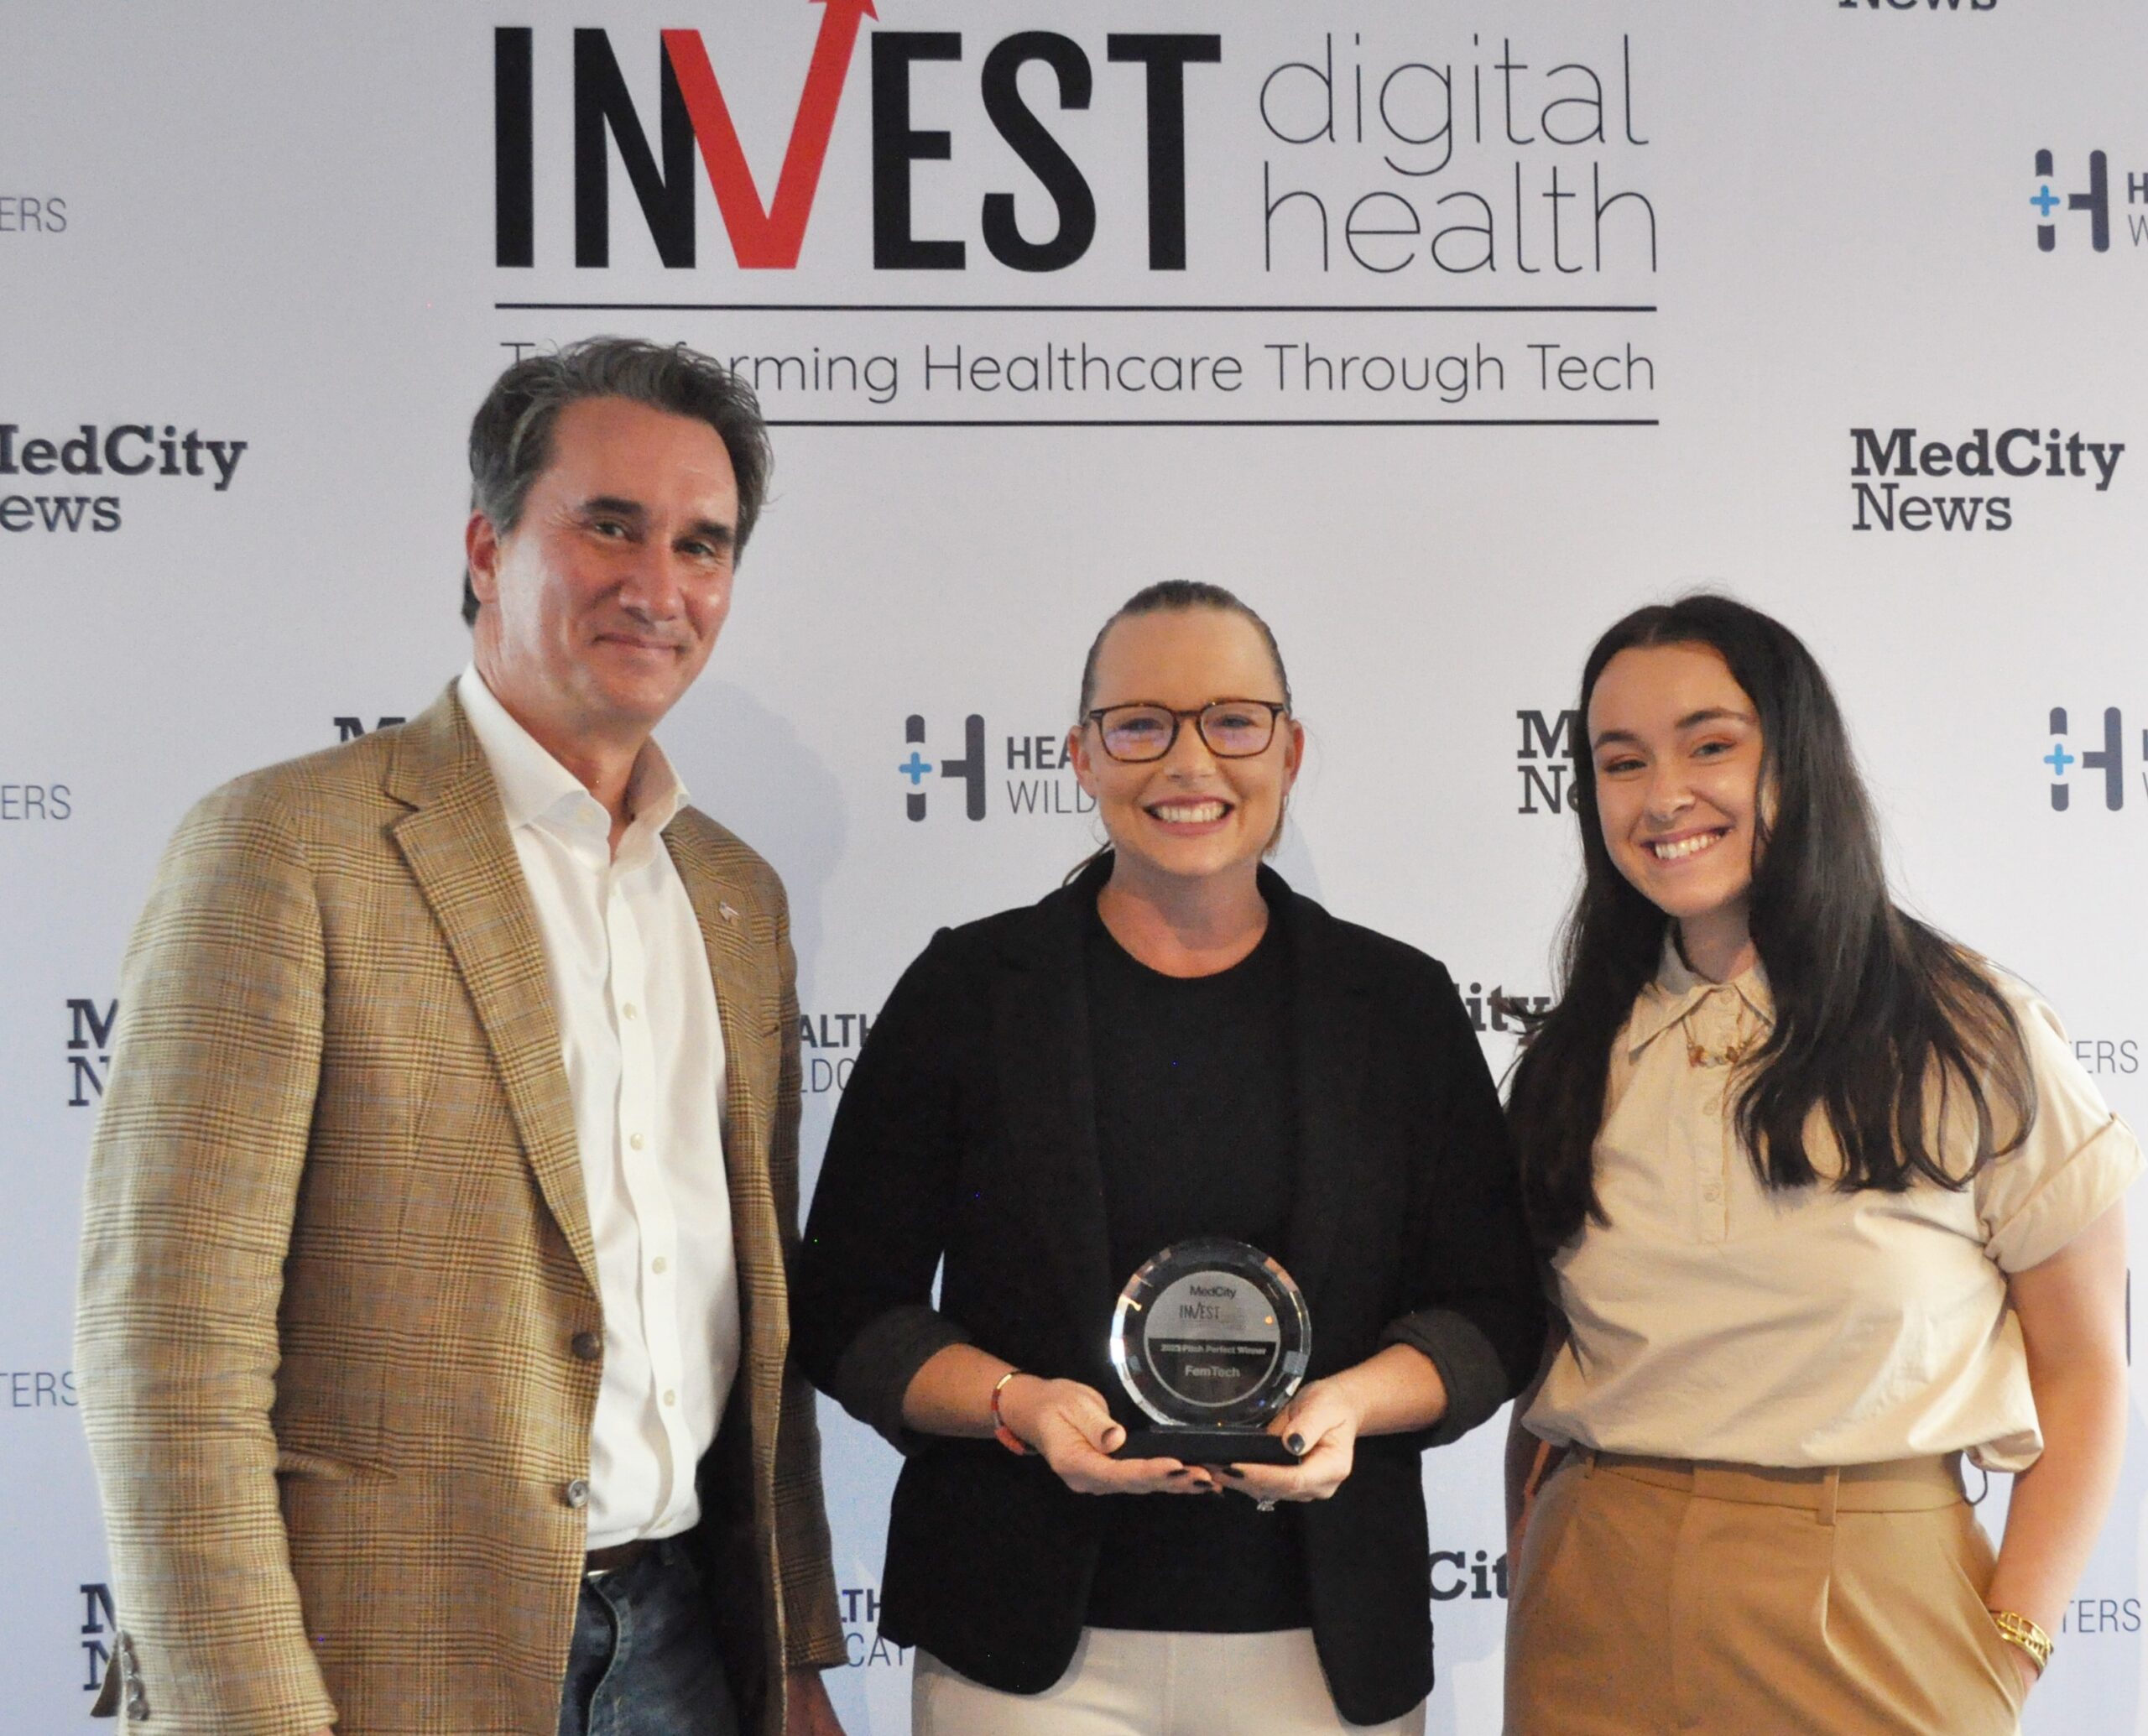 Who Won INVEST Digital Health Pitch Perfect 2023? - MedCity News